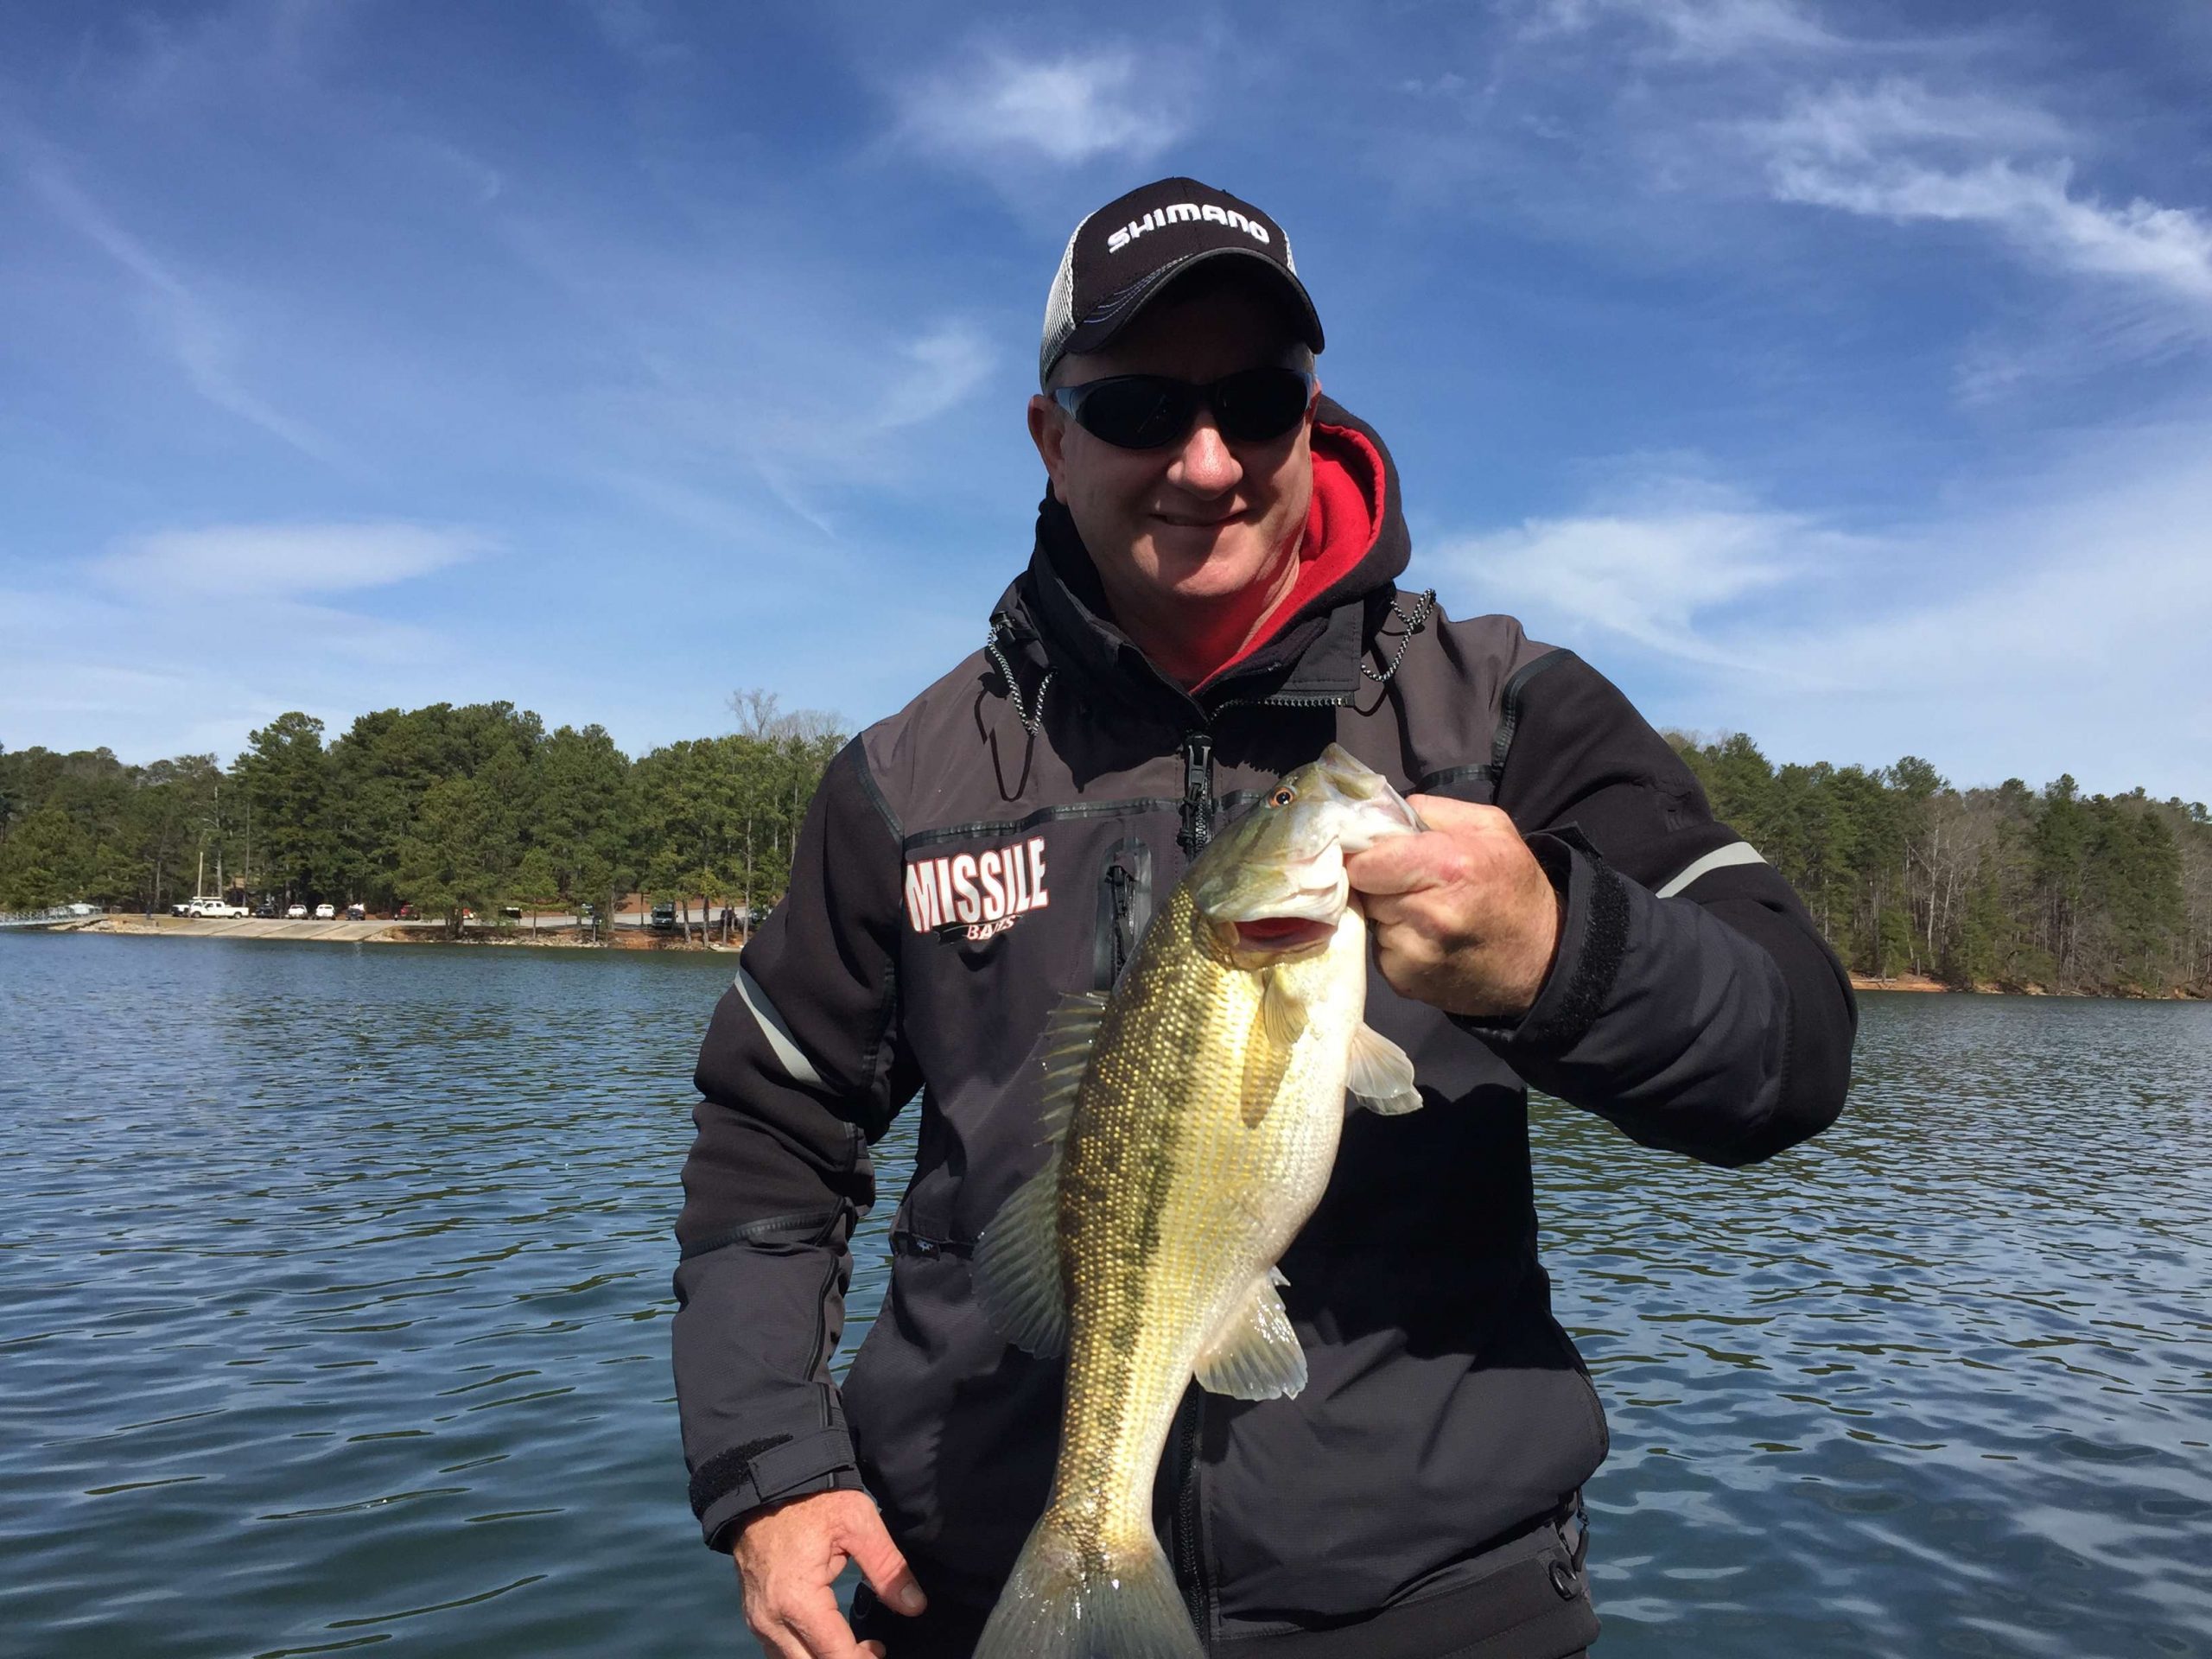 Ed Loughran with his third, a spotted bass at 2 1/2 pounds.